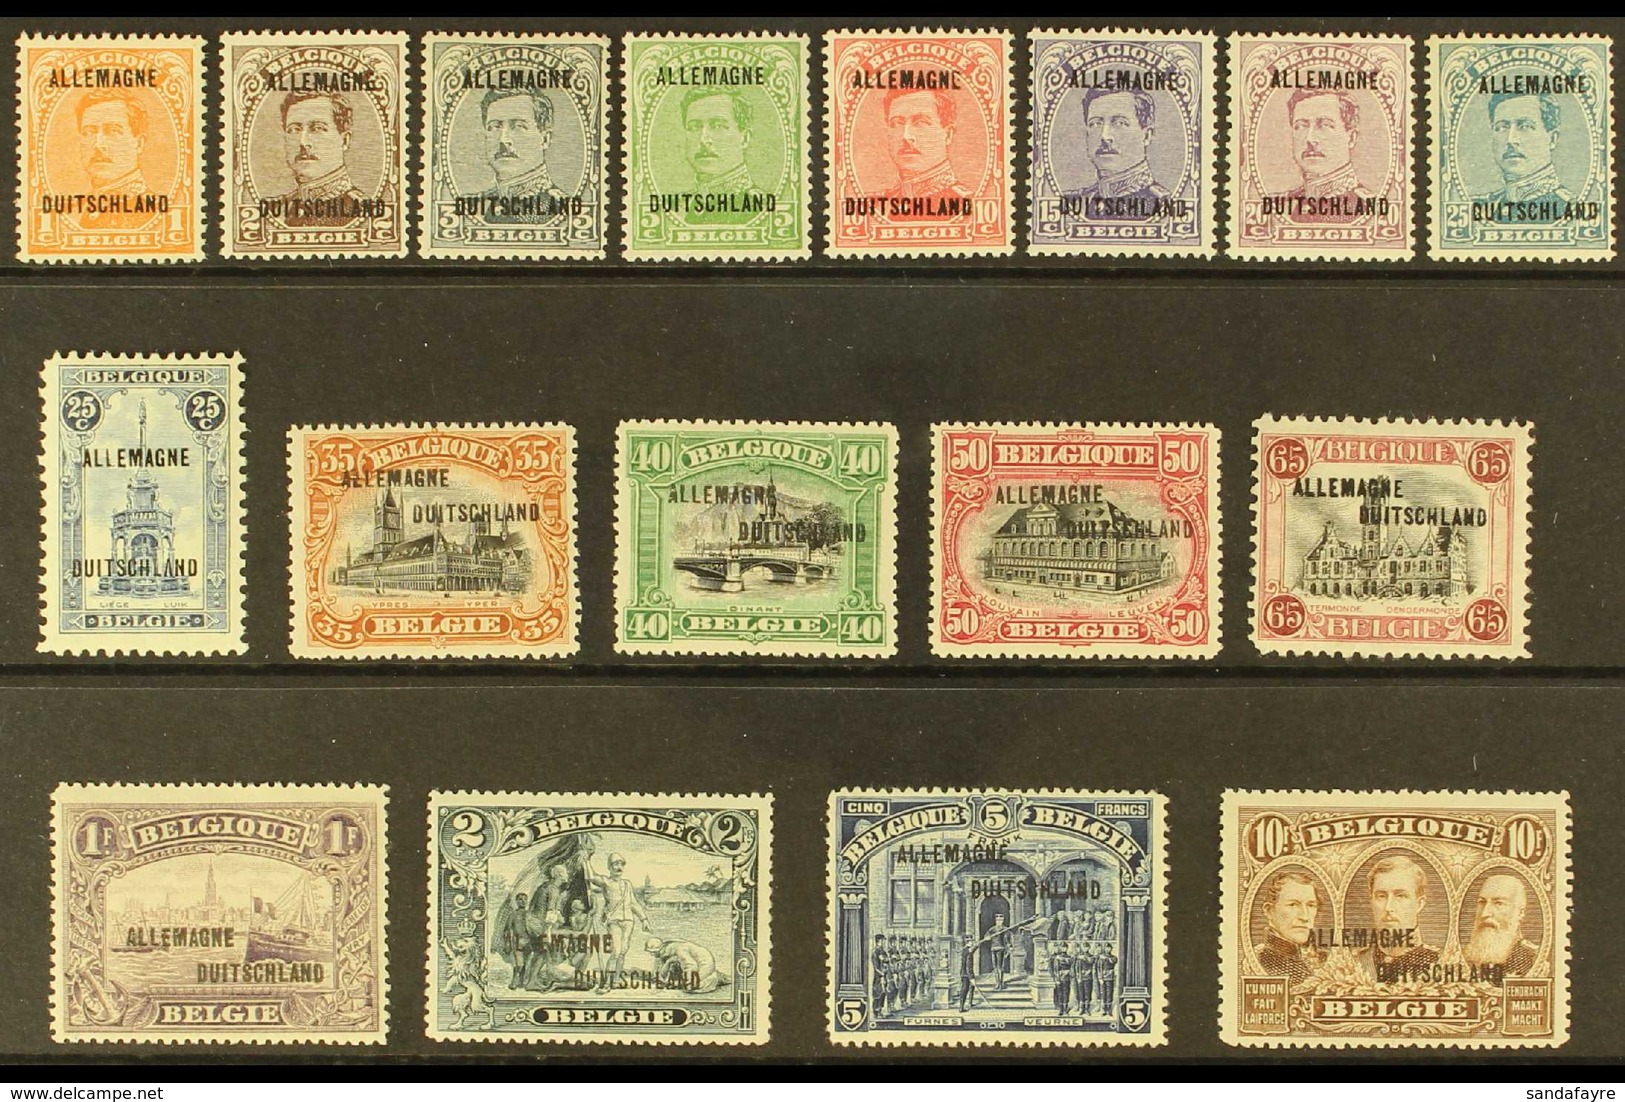 BELGIAN OCCUPATION OF GERMANY FORCES IN THE RHINELAND 1919-21 "Allemagne Duitschland" Overprints Complete Set, COB OC38/ - Other & Unclassified